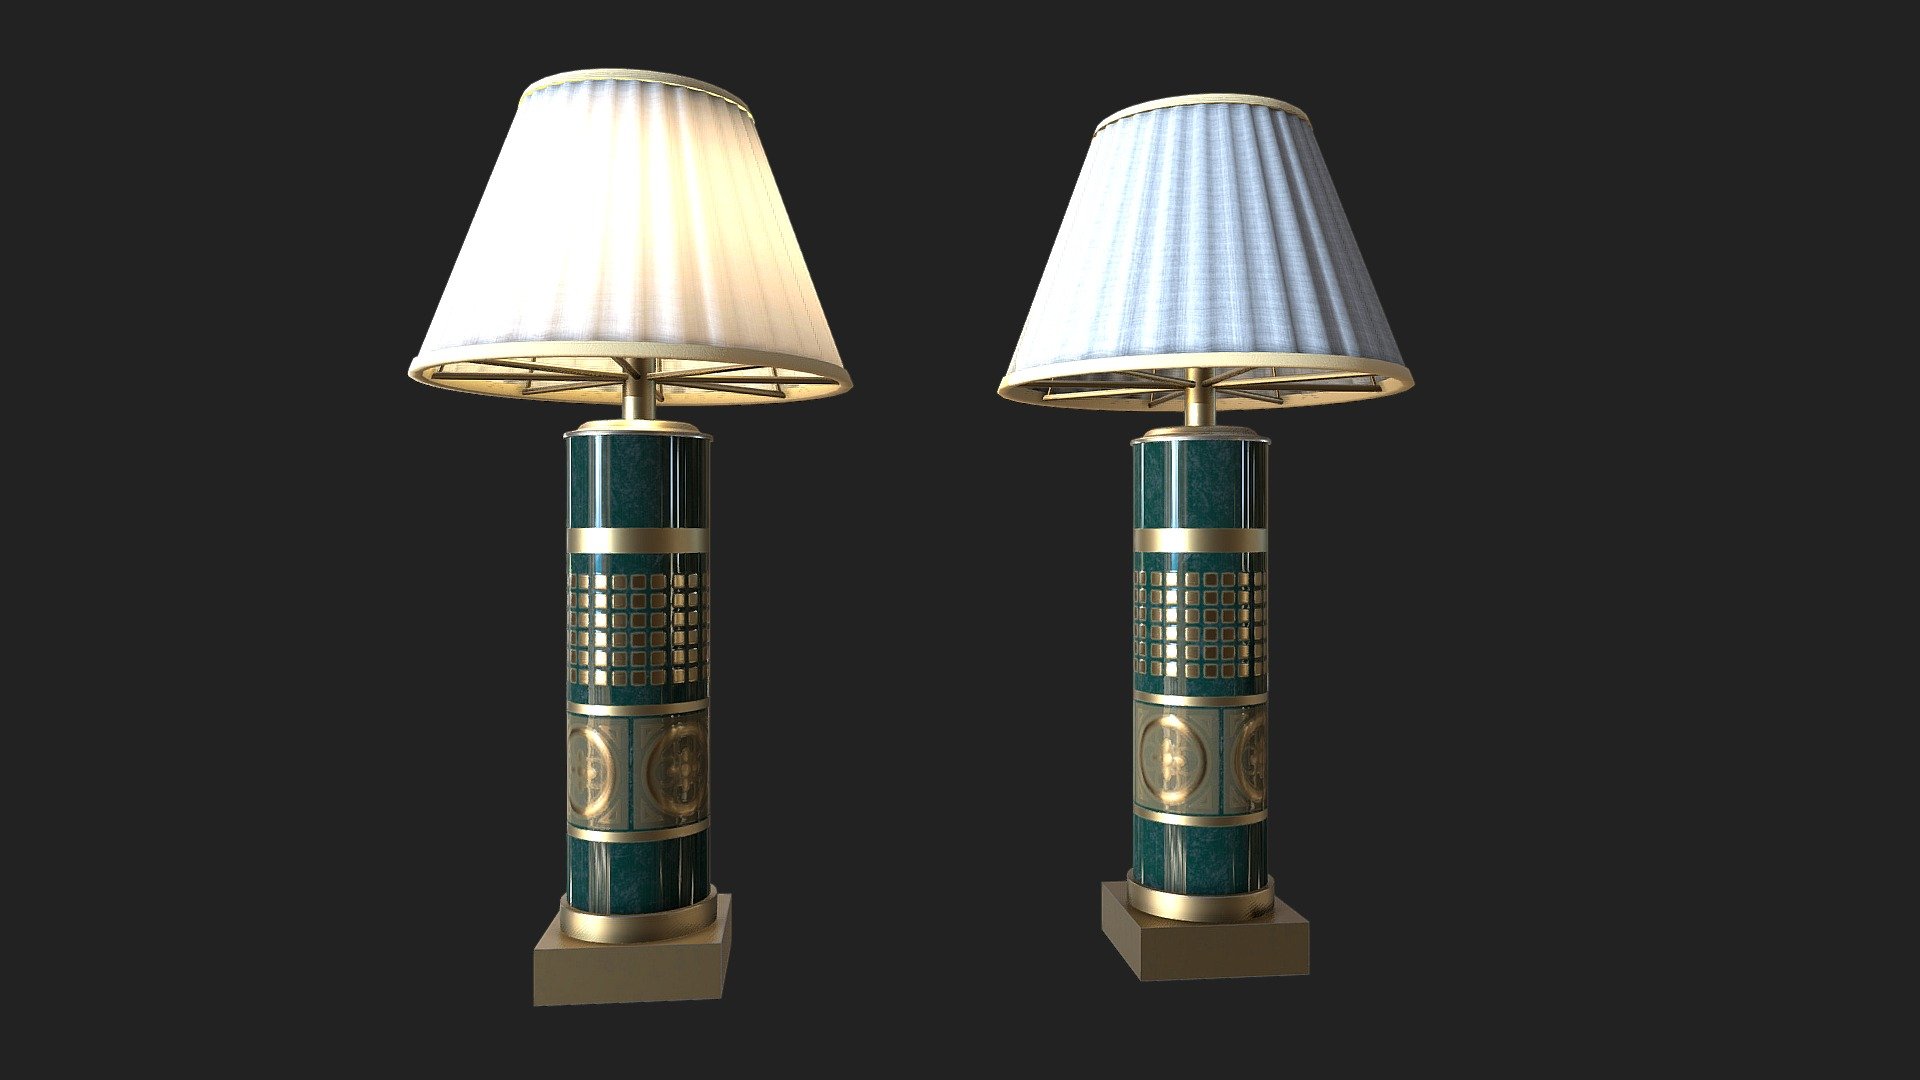 2x 2048x2048 texture packs, one for the bulb glass and the other for the lamp (PBR Metal Rough, Unity HDRP, Unity Standard Metallic and UE):

PBR Metal Rough: BaseColor, AO, Height, Normal, Roughness and Metallic;

Unity HDRP: BaseColor, MaskMap, Normal;

Unity Standard Metallic: AlbedoTransparency, MetallicSmoothness, Normal;

Unreal Engine: BaseColor, Normal, Occlusion Roughness Metallic;

The package also has the .fbx, .obj, .dae and .blend files - Luxury Lamp - Buy Royalty Free 3D model by Thiago Ferraro (@thiagoferraro) 3d model